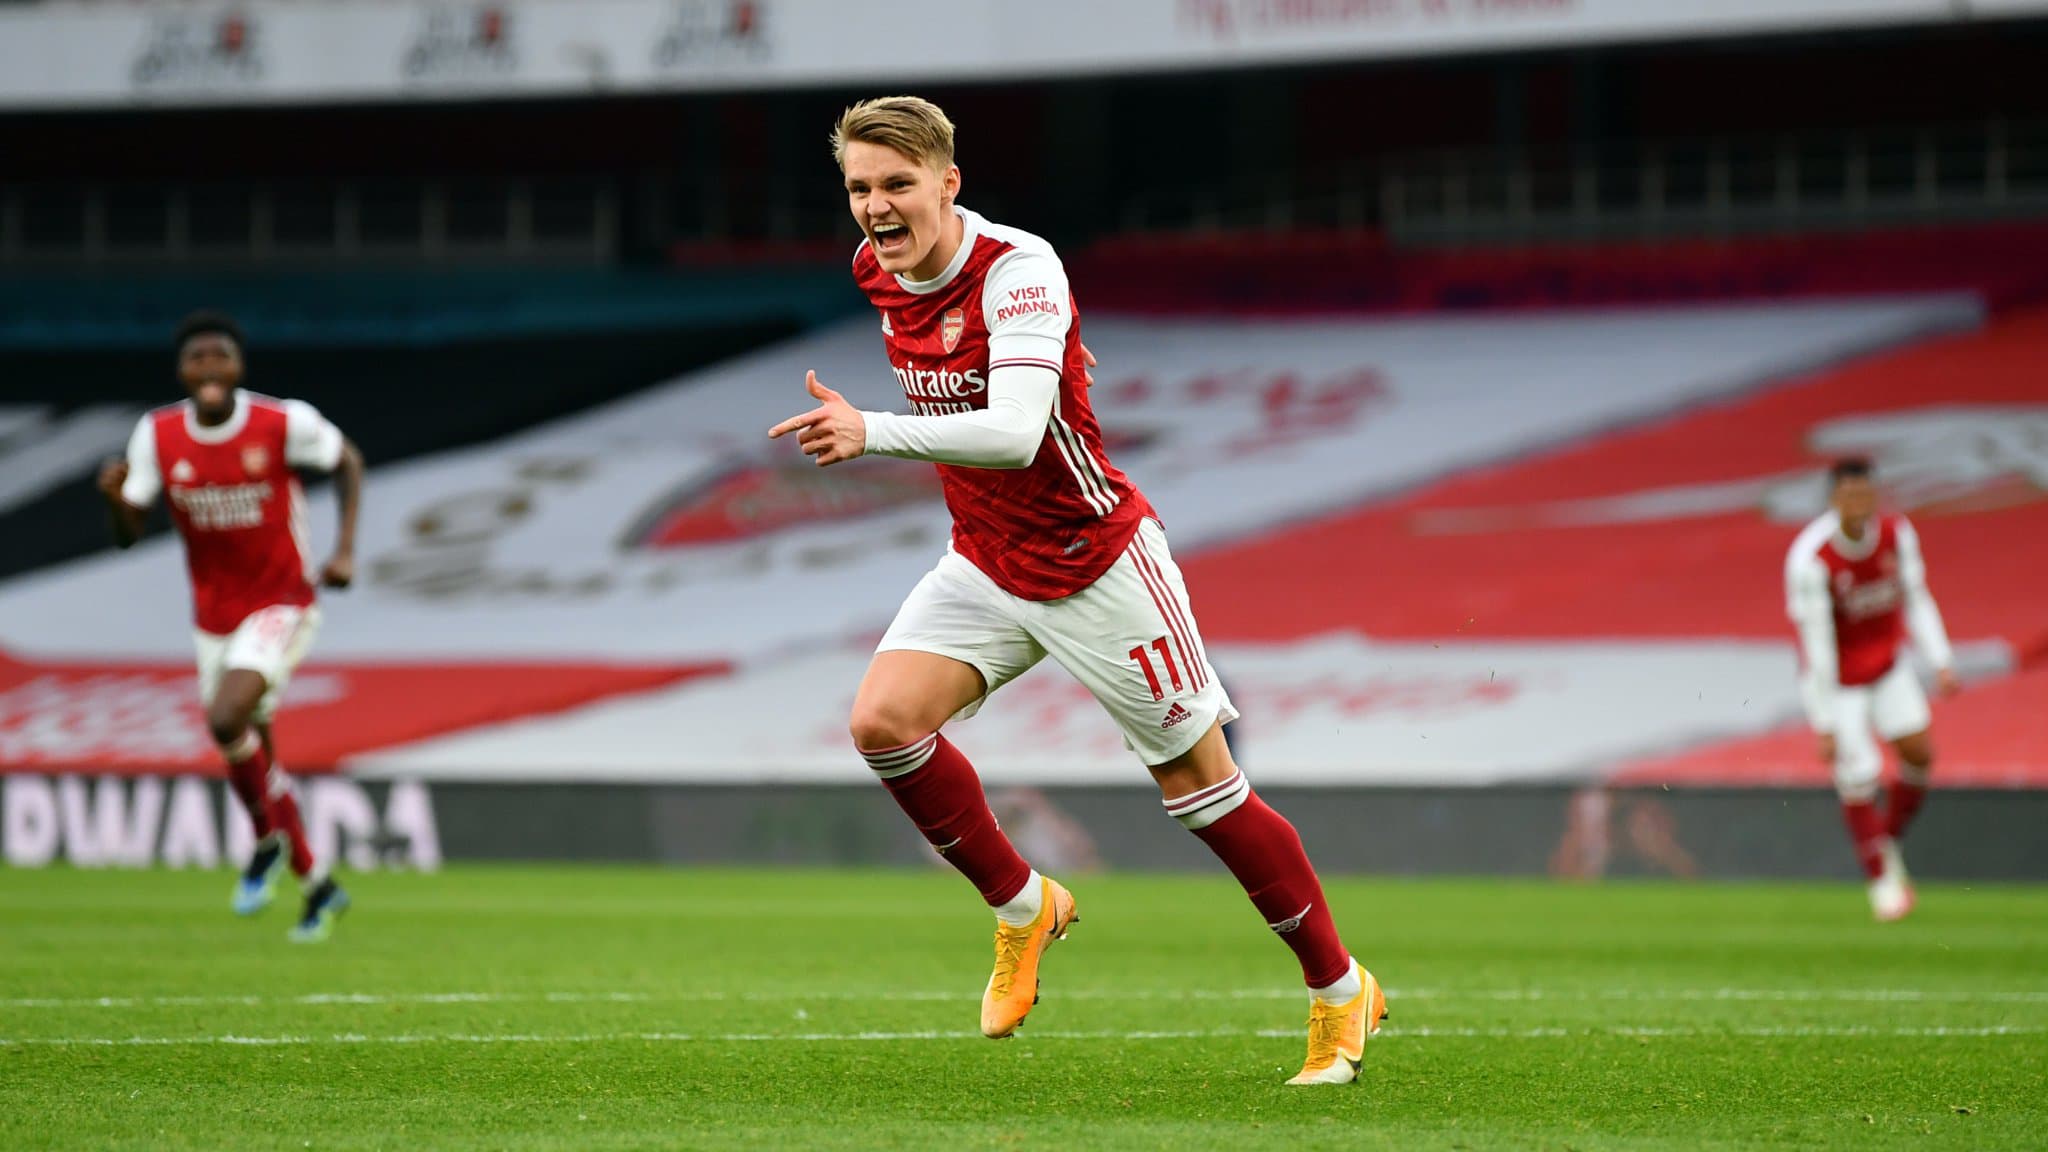 Live transfer: Arsenal already want to keep Odegaard. The Indian Paper